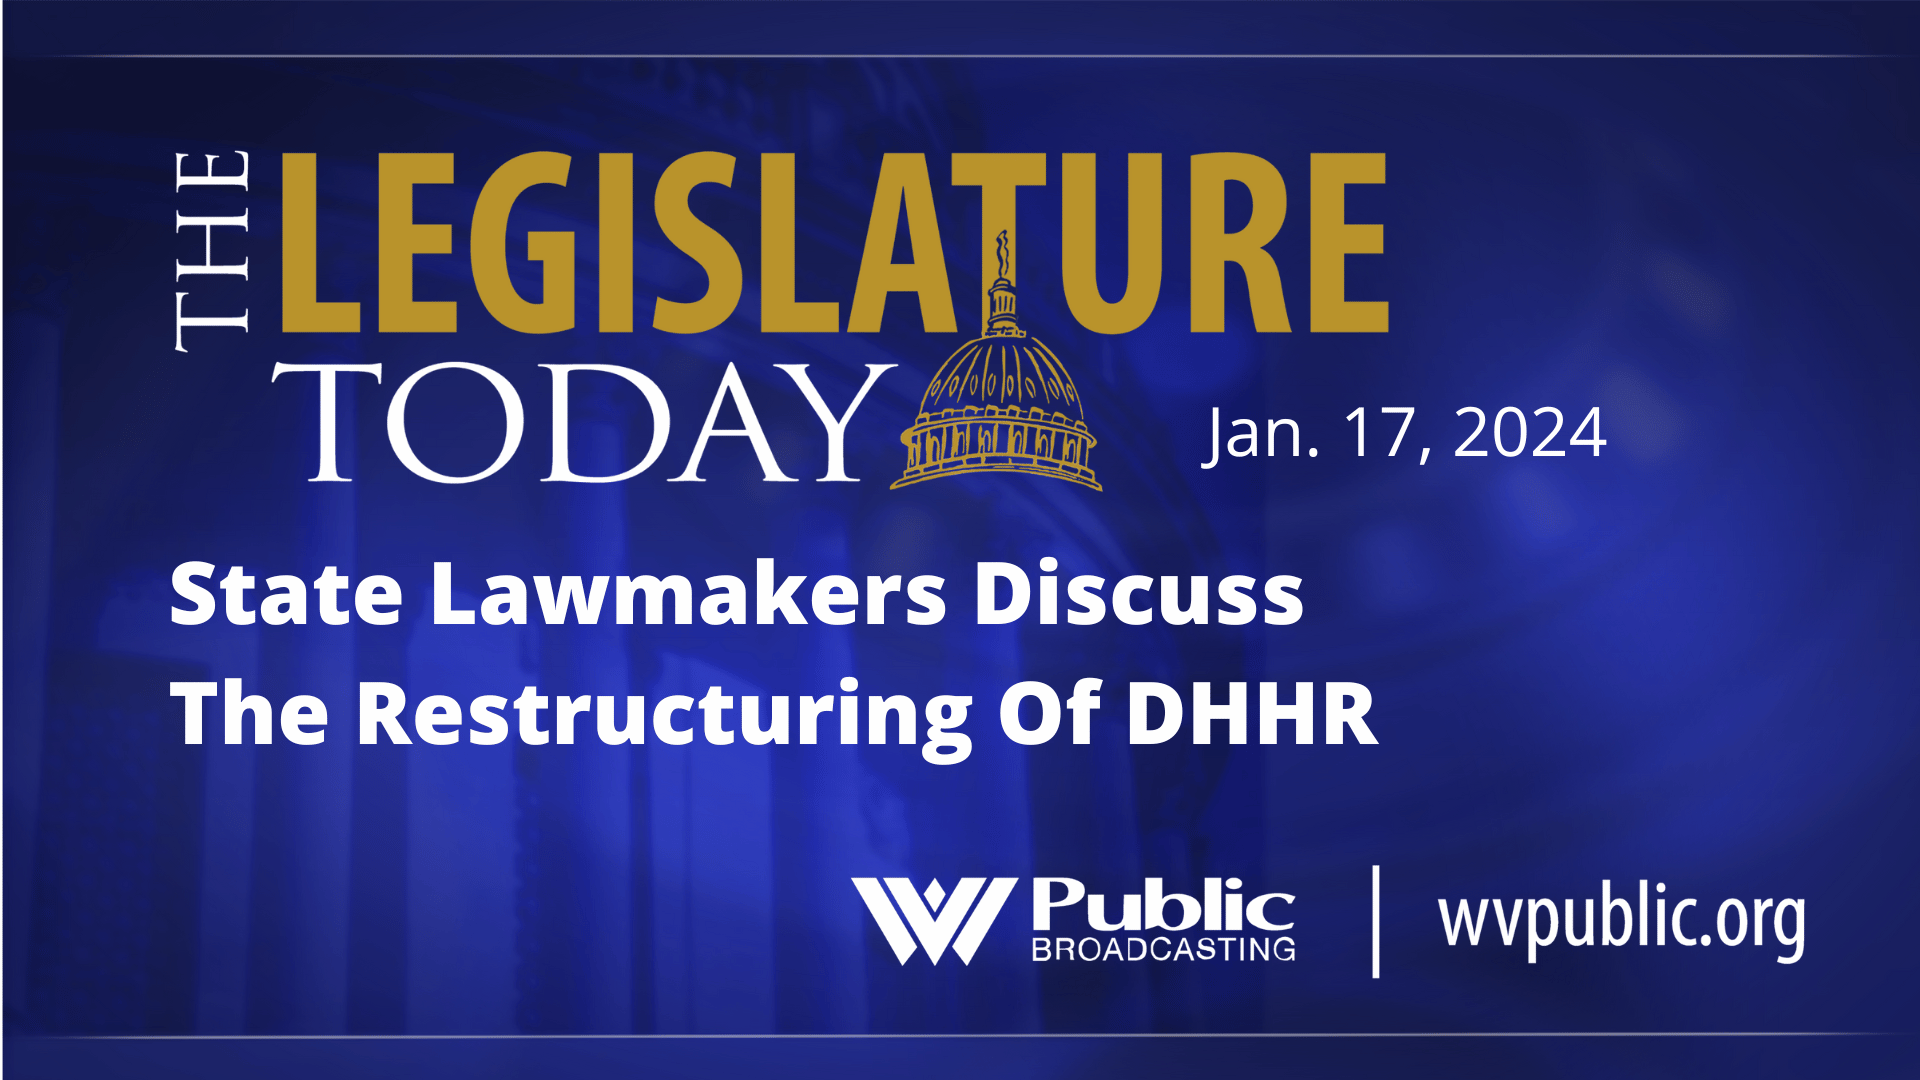 State Lawmakers Discuss The Restructuring Of DHHR